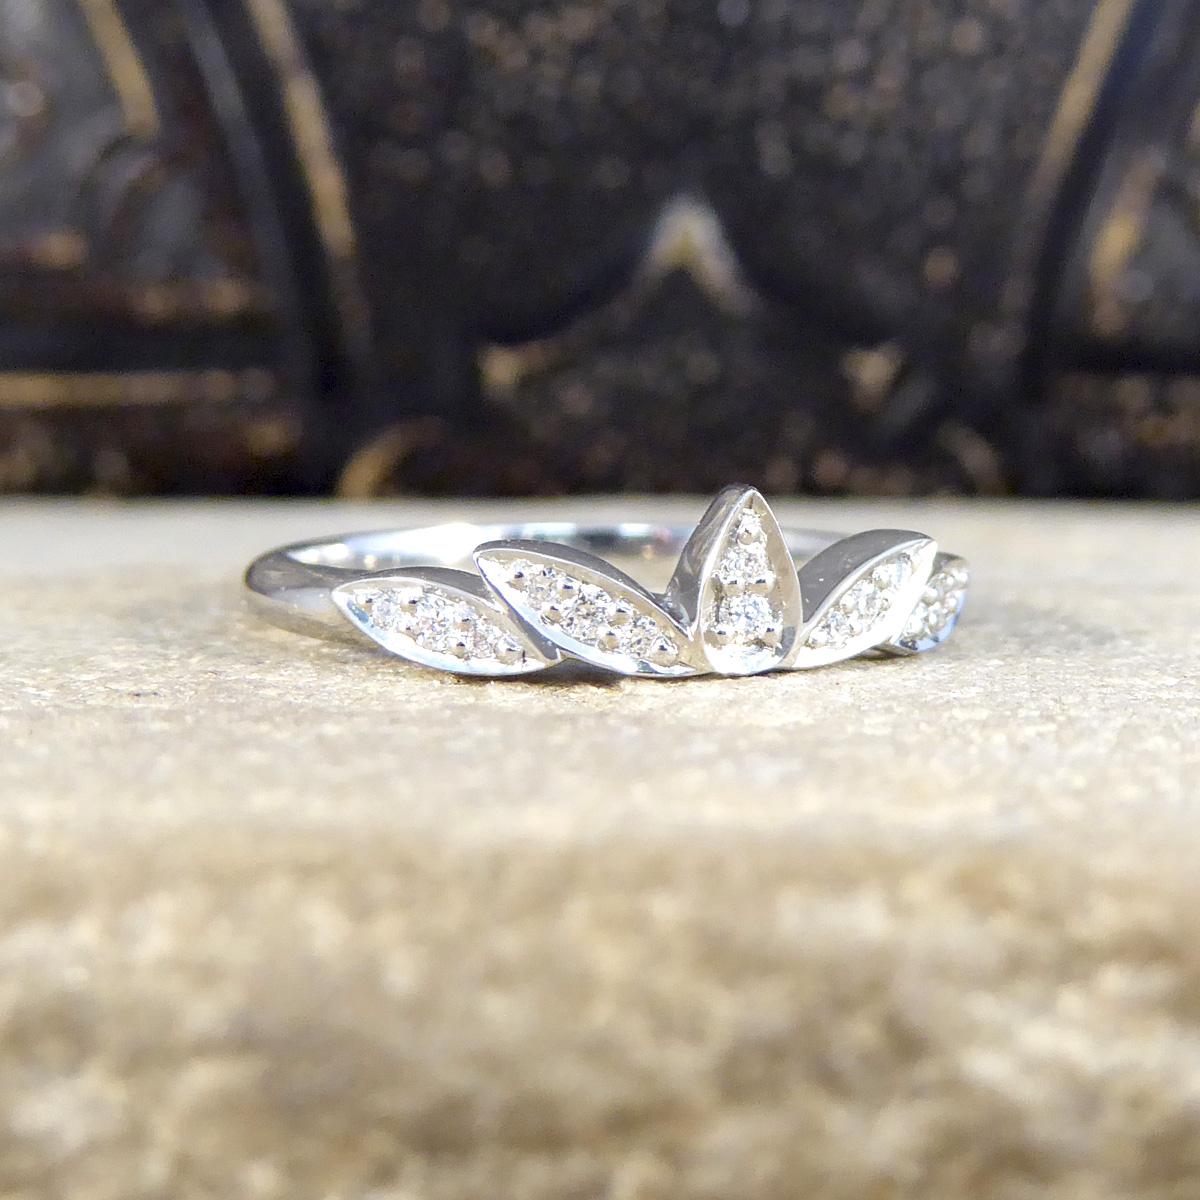 This ring works brilliantly on its own or as a stand out wedding or stackable ring. It is set with 14 Diamonds in a marquise shaped crown-like design allowing it to shine on its own or be the crown on top of an engagement ring with the design